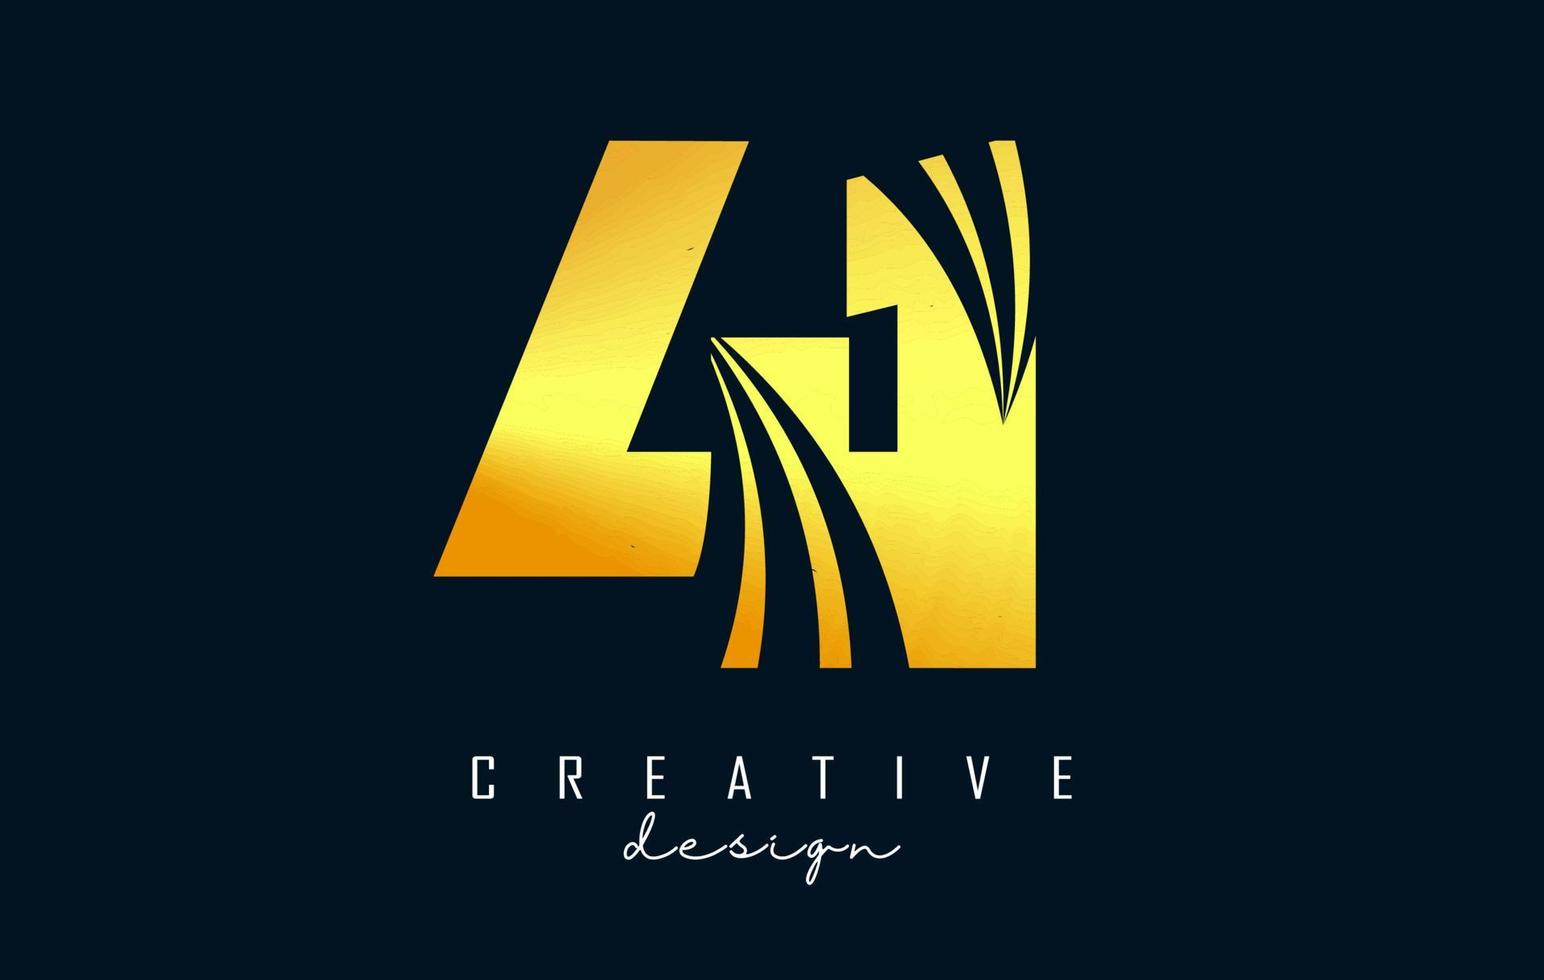 Golden Creative number 41 4 1 logo with leading lines and road concept design. Number with geometric design. vector